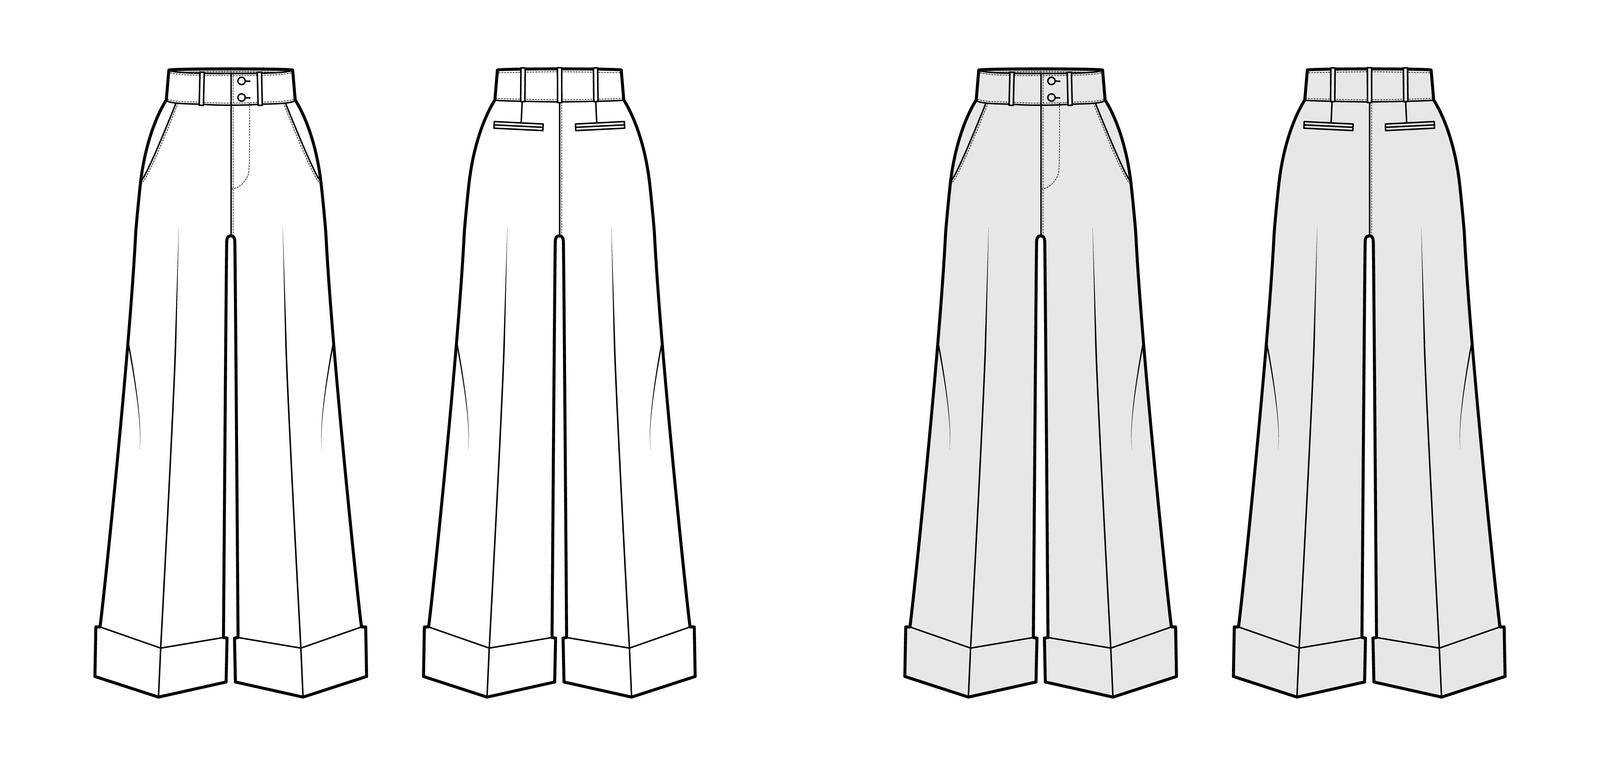 Pants oxford tailored technical fashion illustration with normal waist, high rise, full length, slant jetted pockets. Flat trousers apparel template front, back white, grey color. Women men CAD mockup